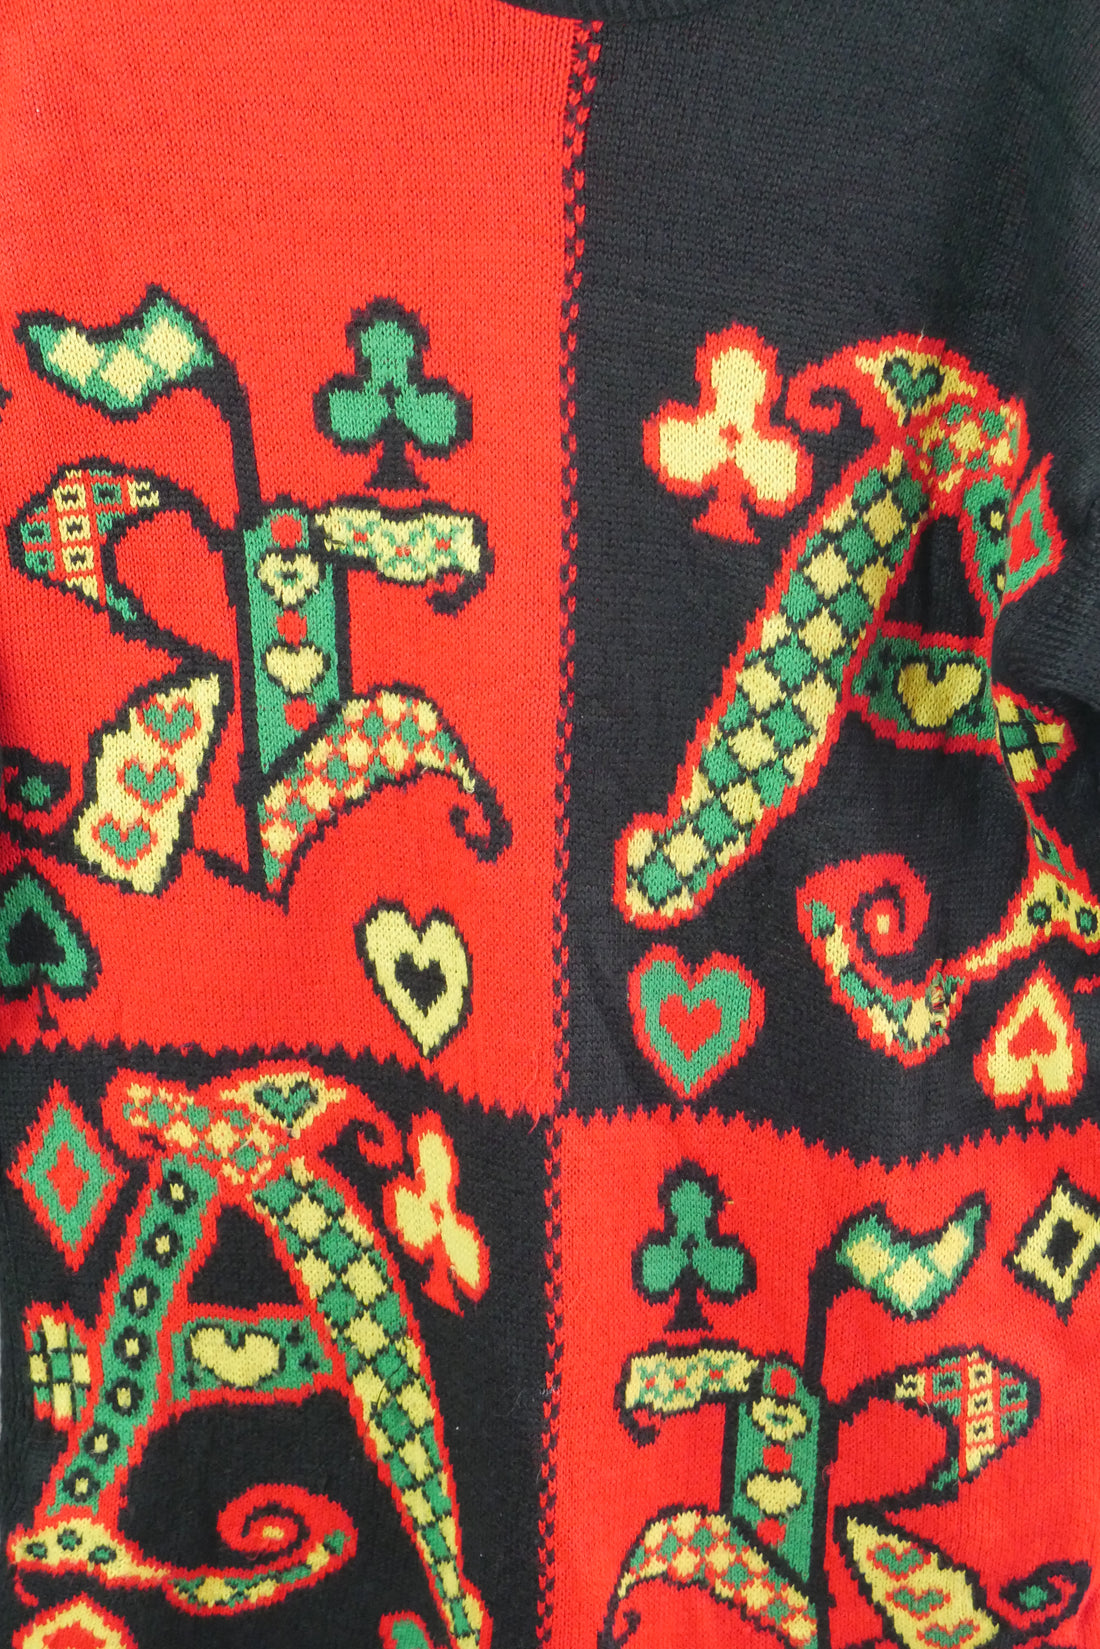 The Vintage Playing Card Style Knit Jumper (L)